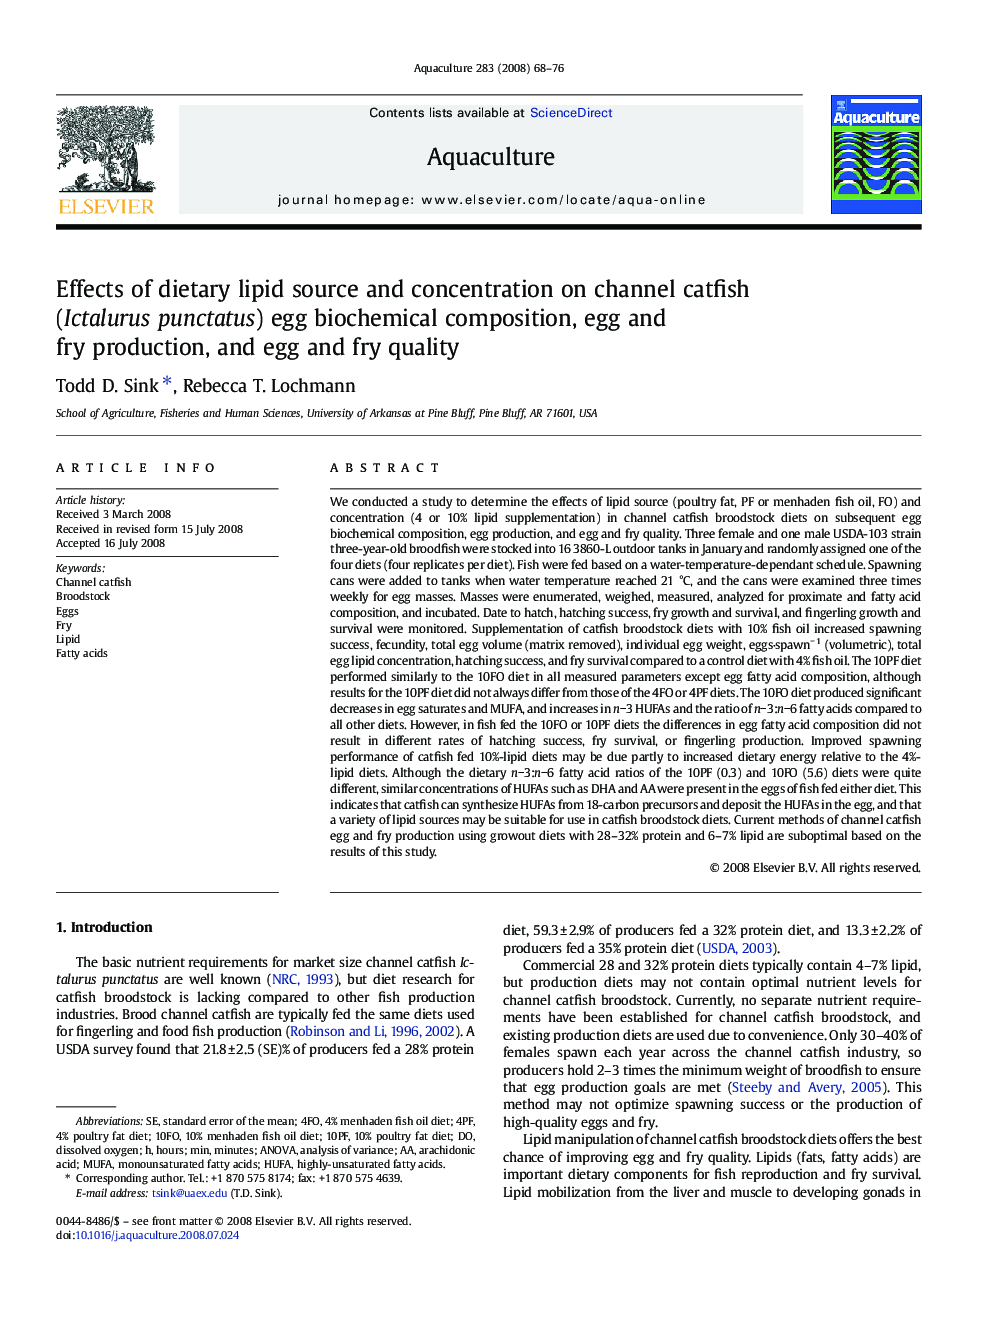 Effects of dietary lipid source and concentration on channel catfish (Ictalurus punctatus) egg biochemical composition, egg and fry production, and egg and fry quality